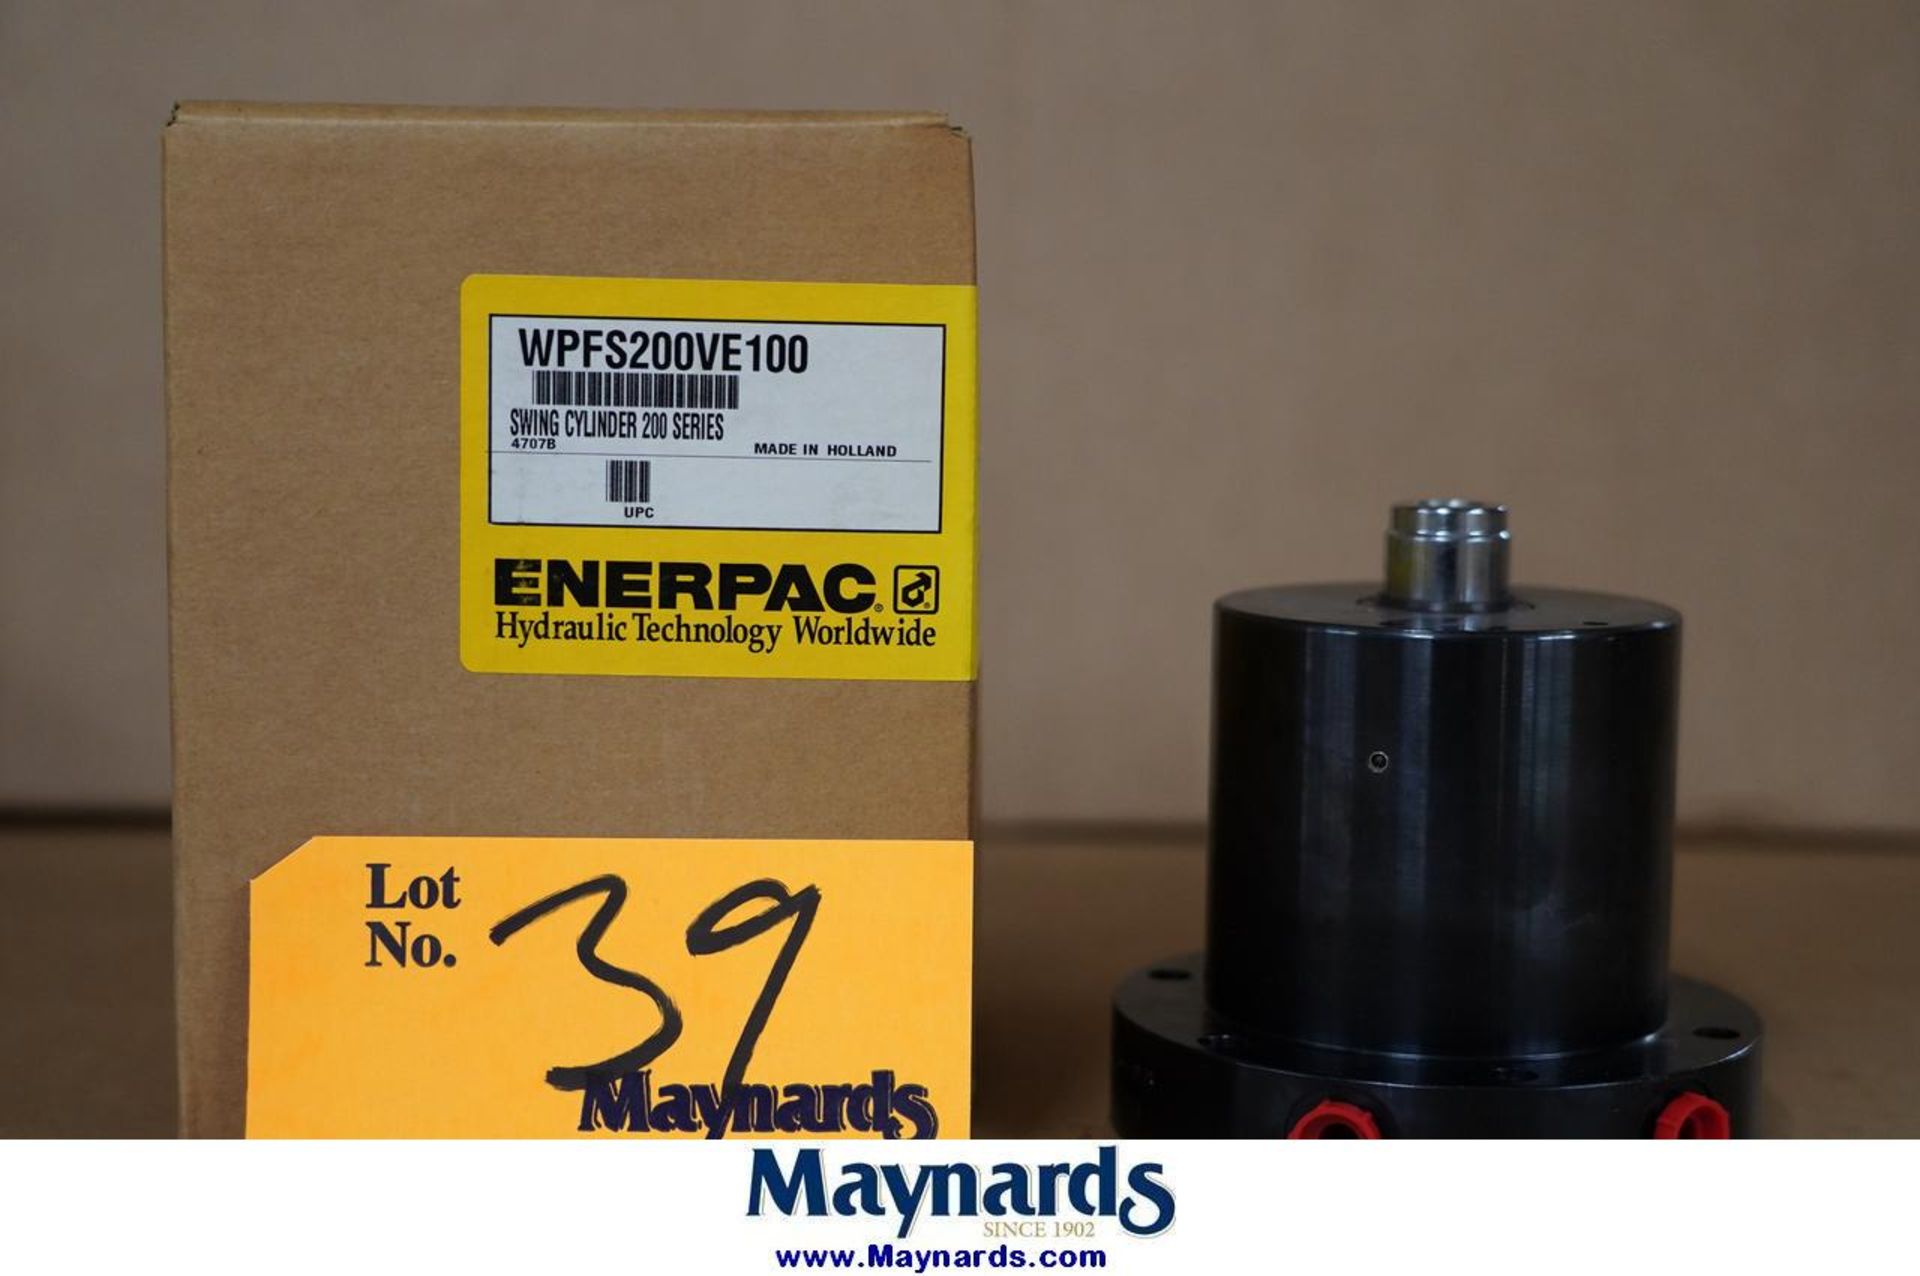 Enerpac WPFS200VE100 Swing Cylinder - Image 2 of 3